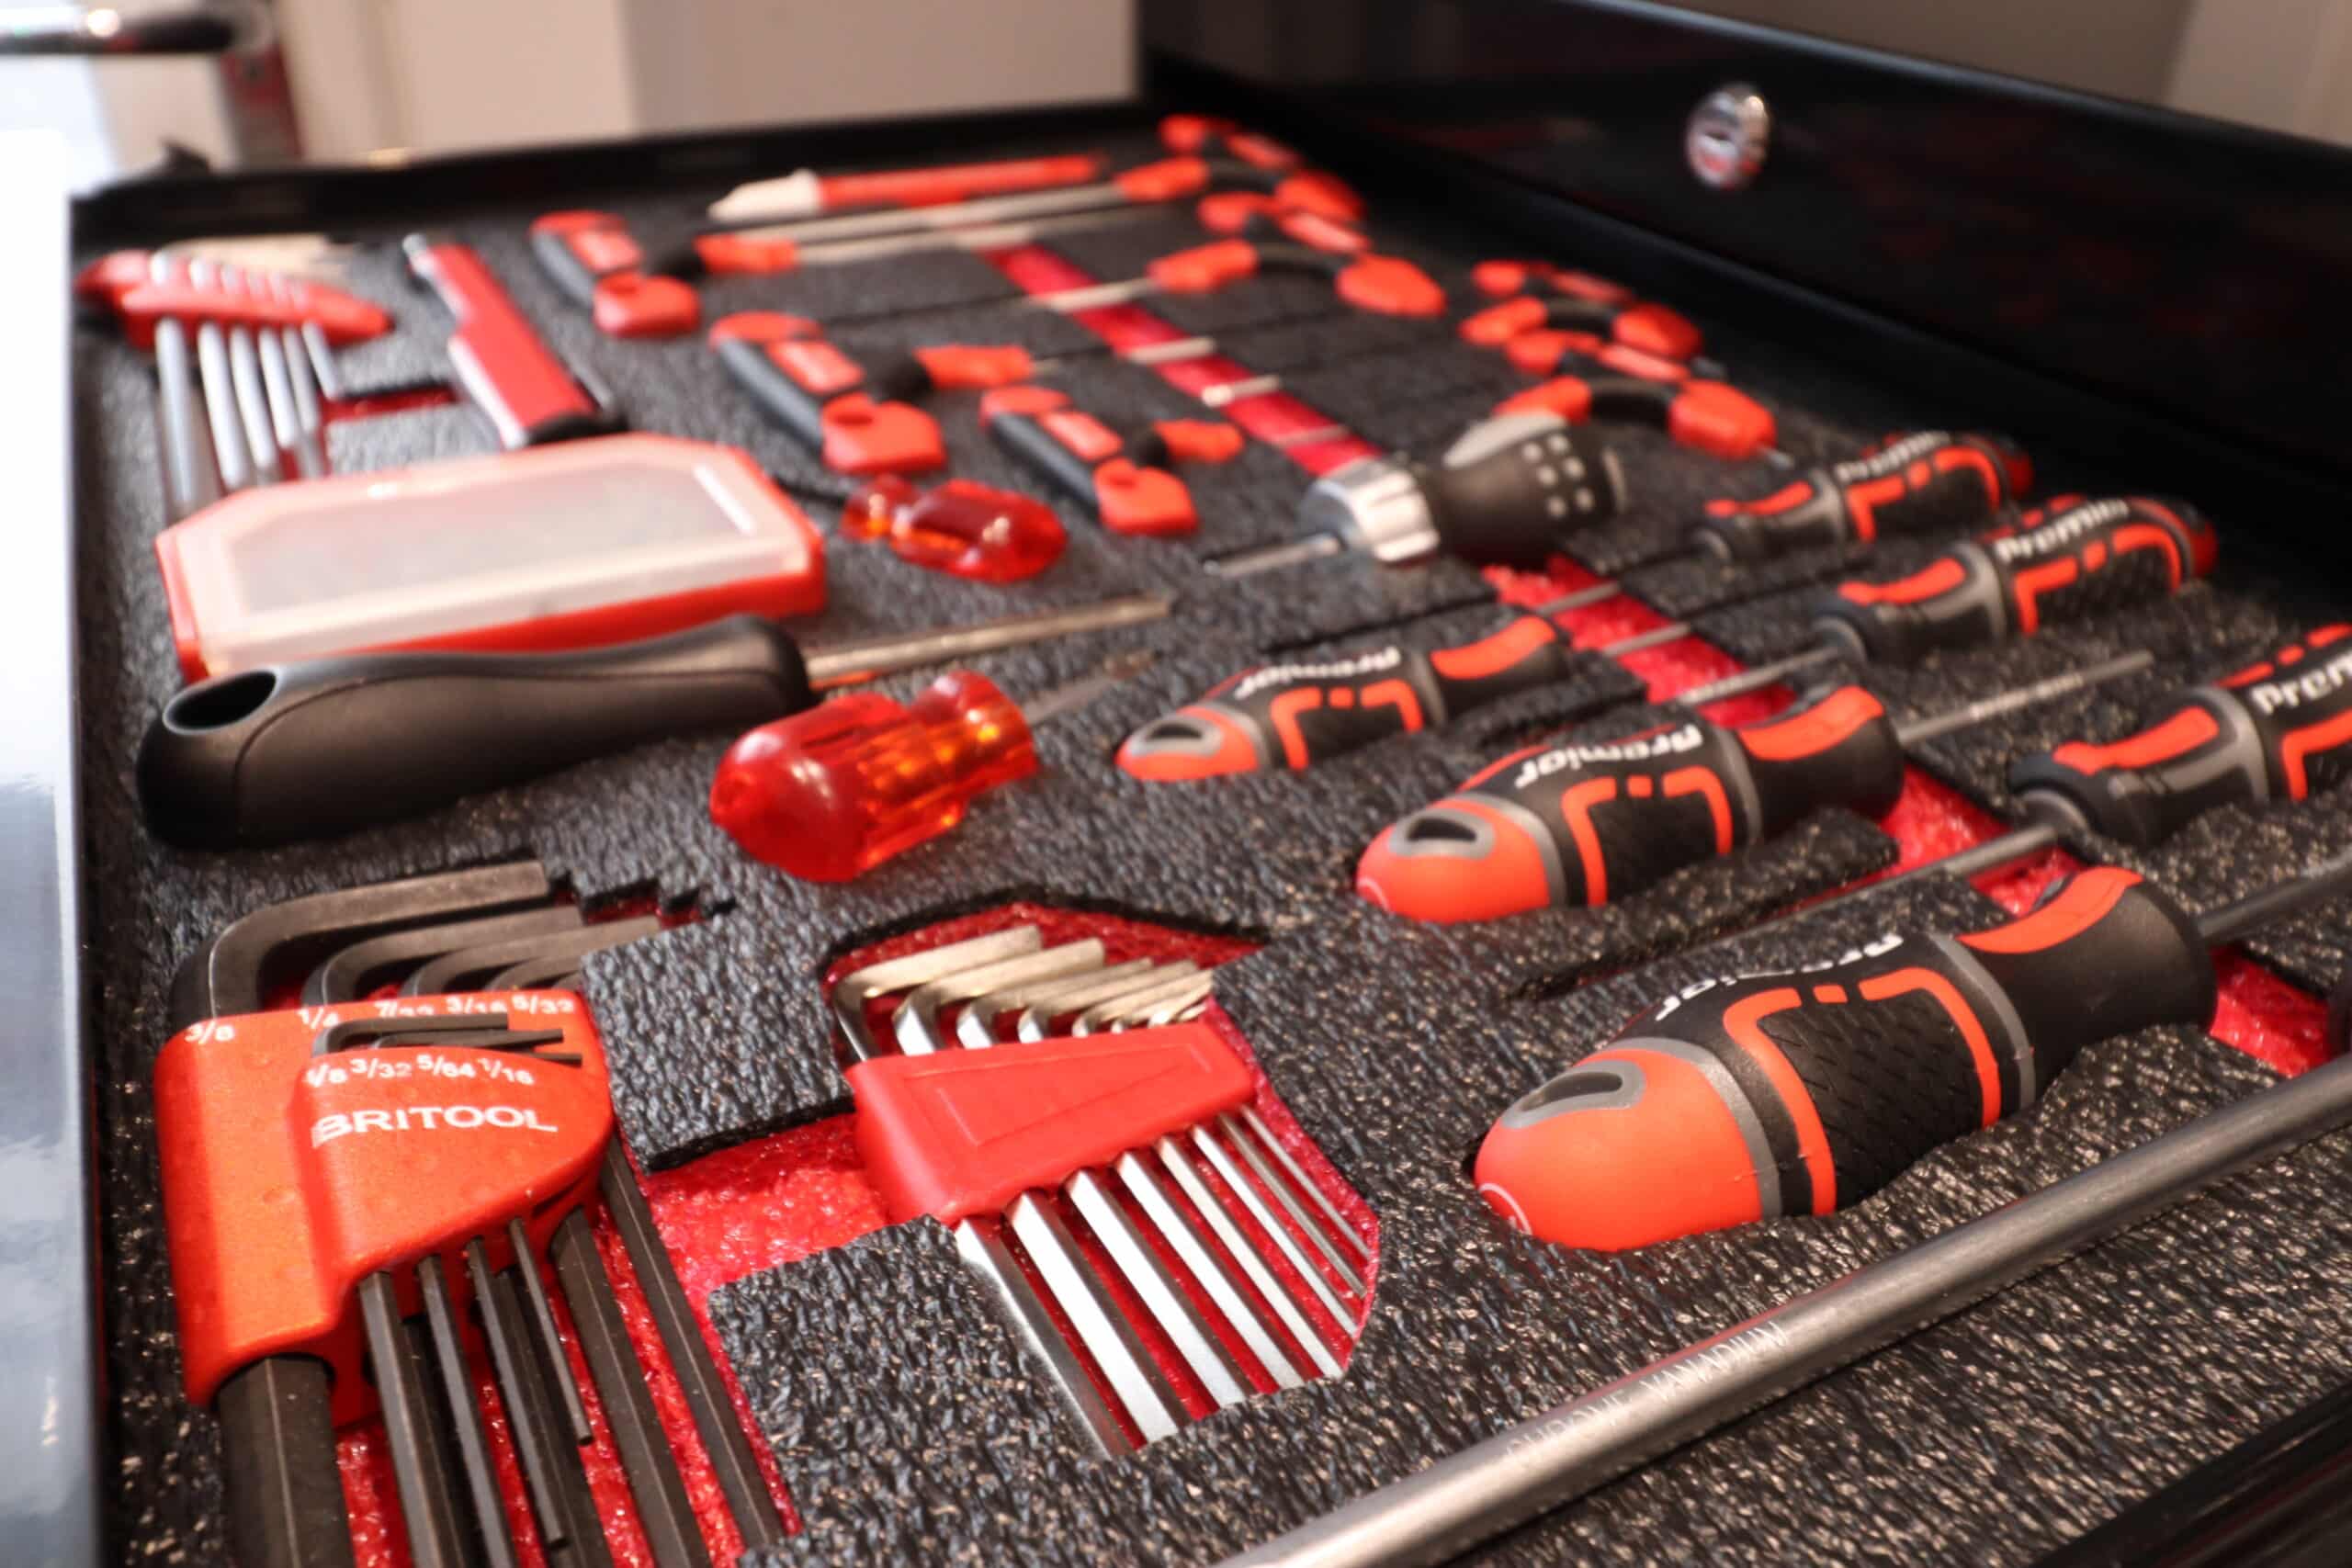 black foam with red underneath sets off the Allen keys and other tools to great effect.  Finger pulls are positioned in key places for ease of removing the tools